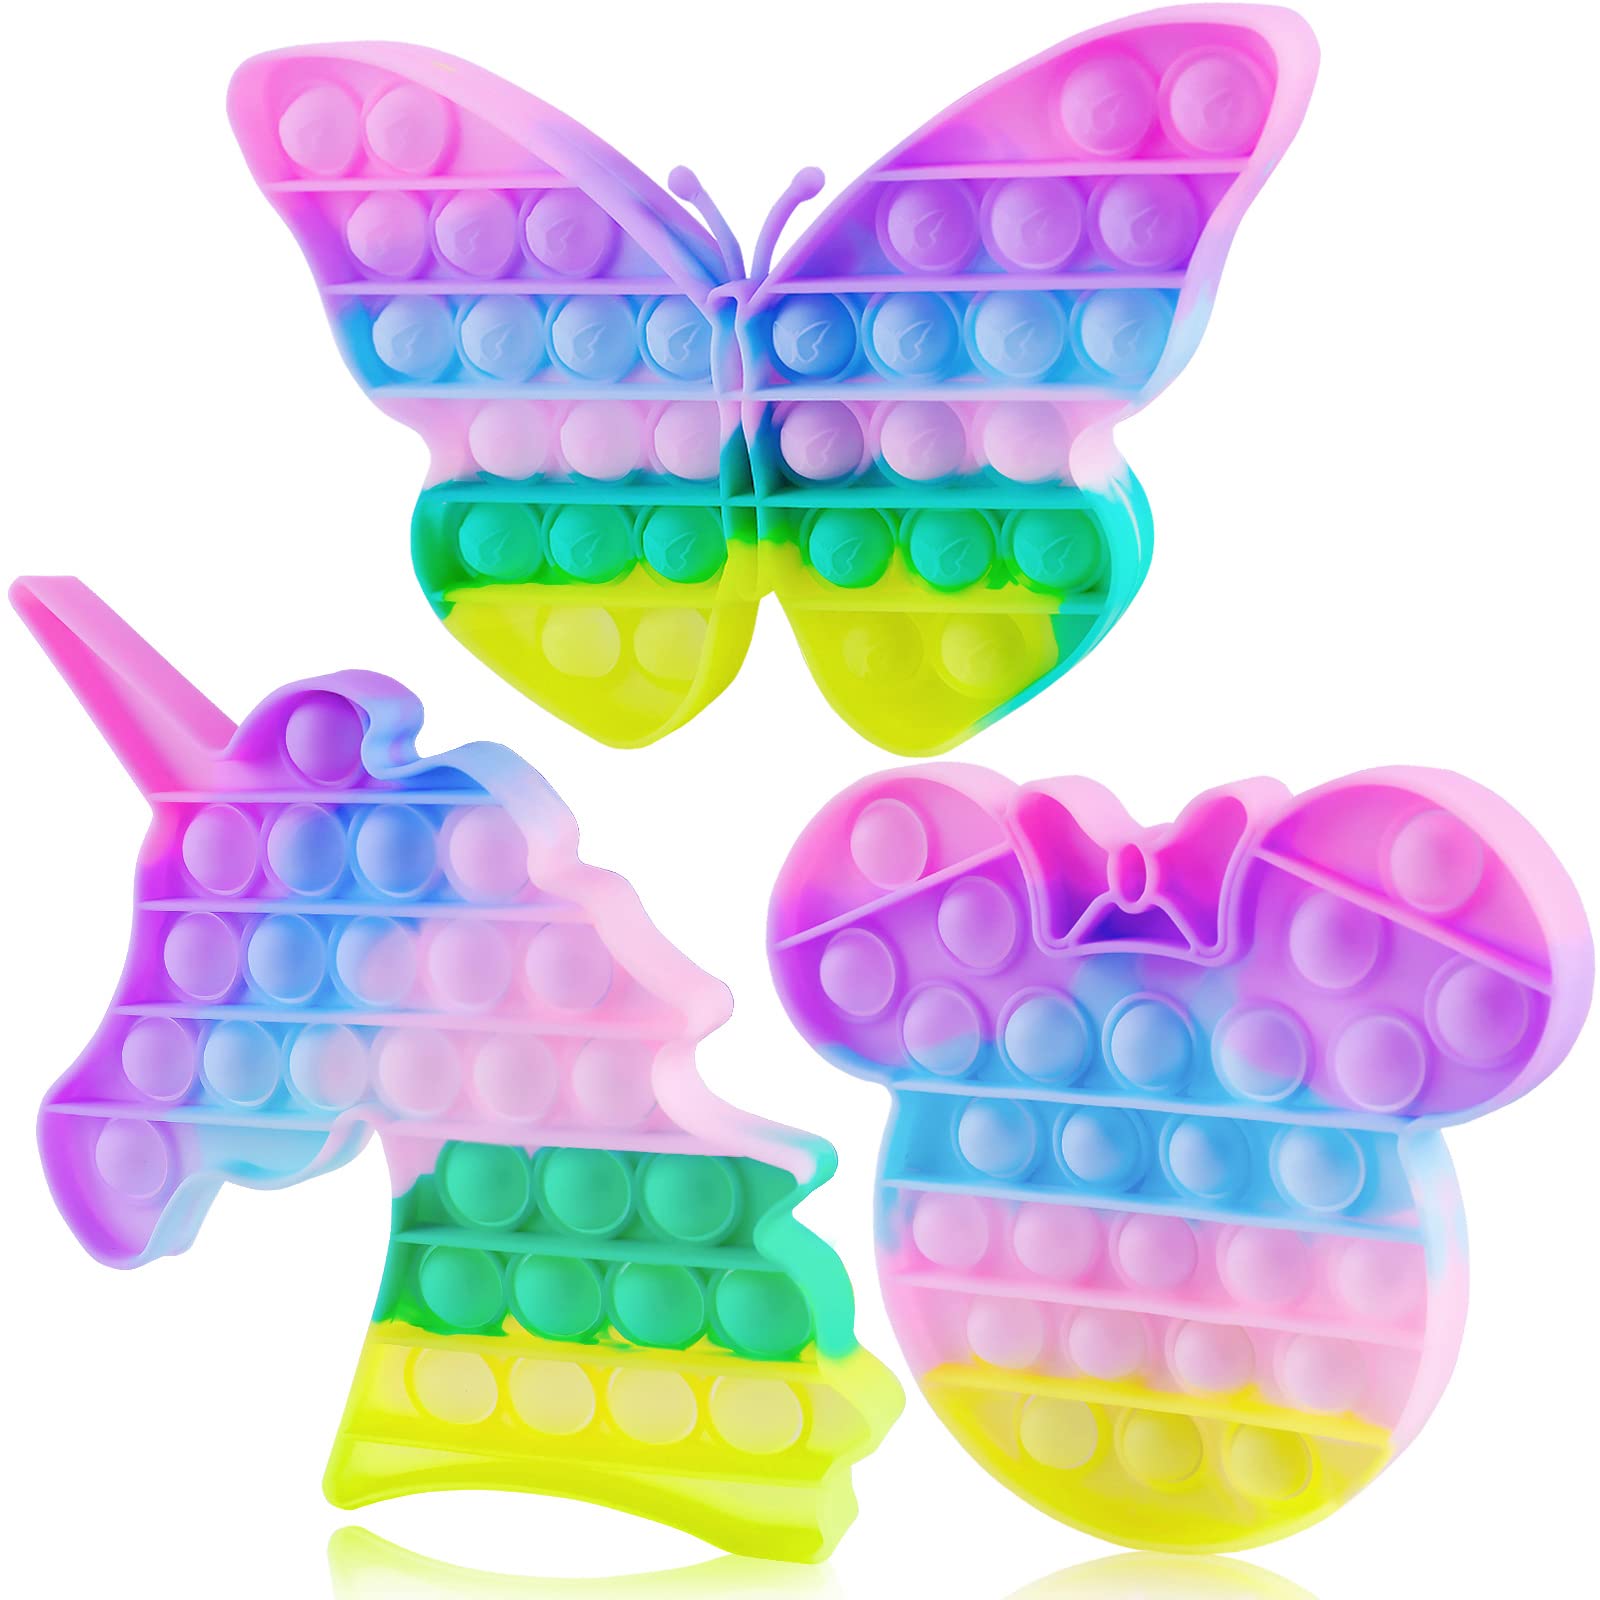 3 Pack Pop Fidget It Toy, Its Popit Popper Push Squeeze Sensory Bubble Anxiety Stress Relief Cheap Popitsfidgets Poppits Pops Popet Kid,it's Popitz Poppits Macaron Rainbow Butterfly Mouse Unicorn Gift